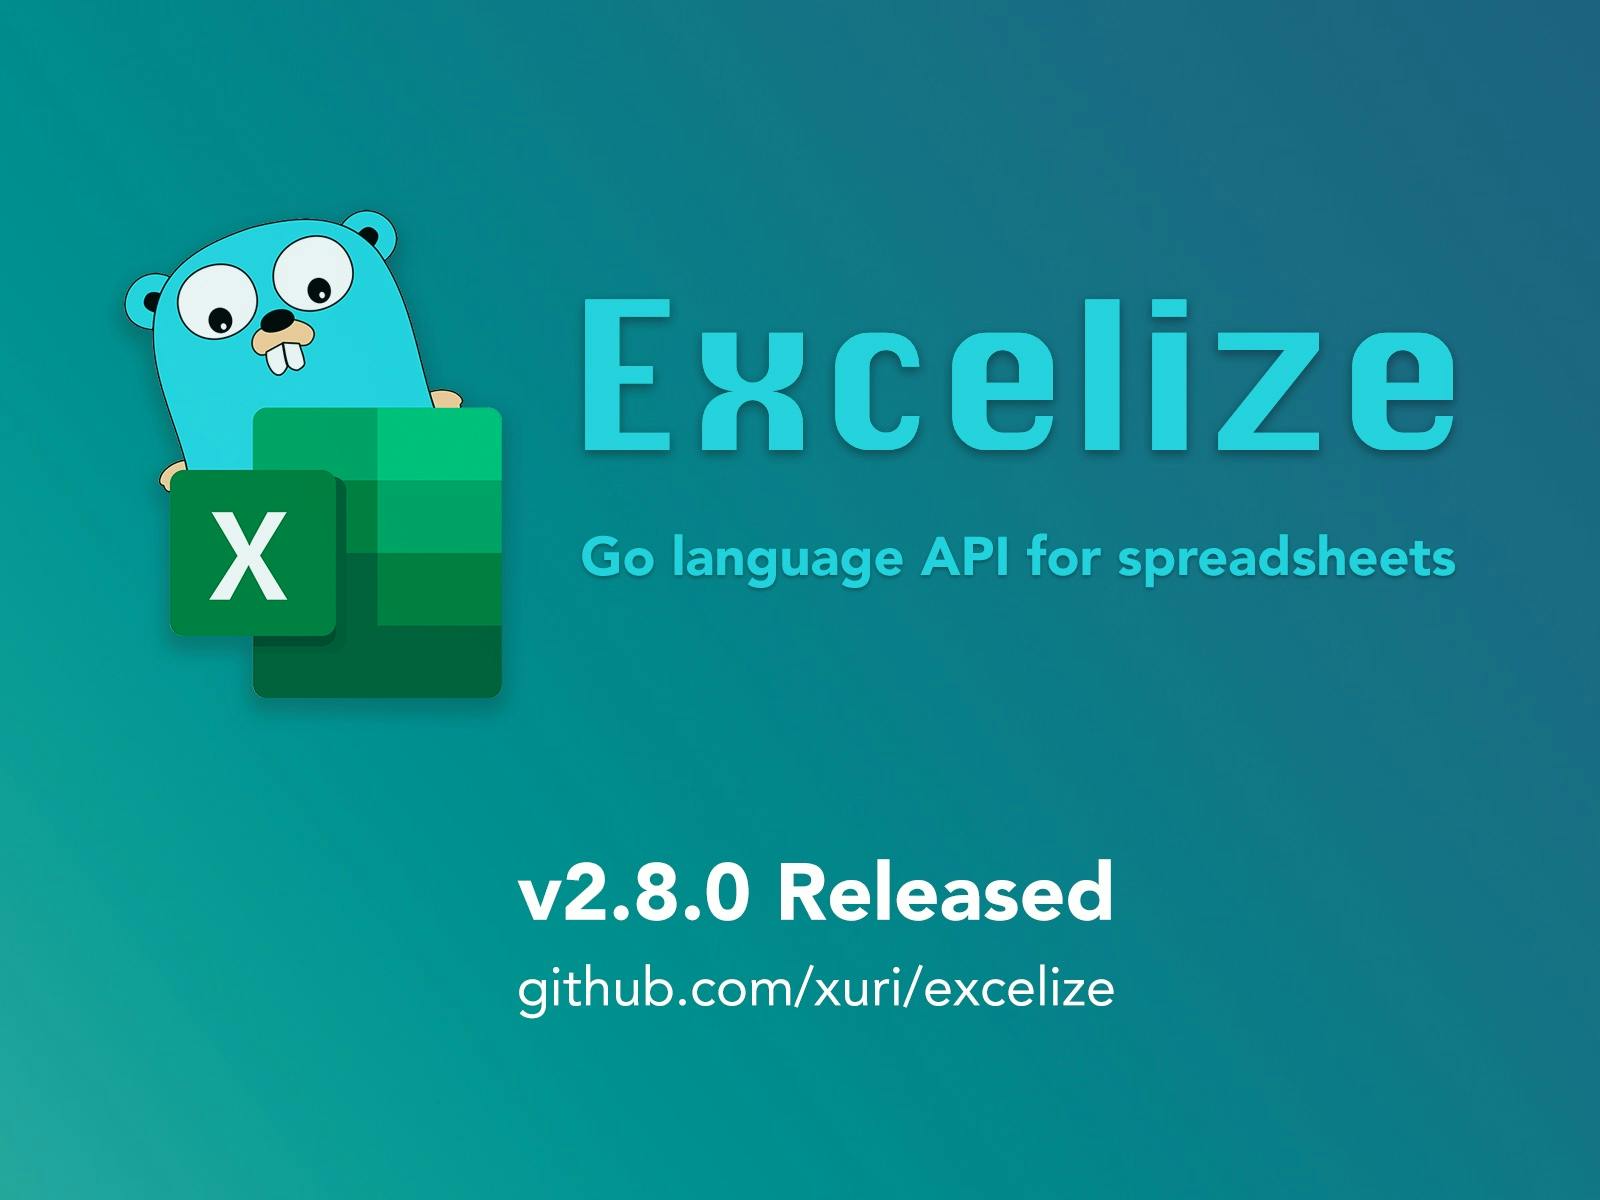 Excelize 2.8.0 Released